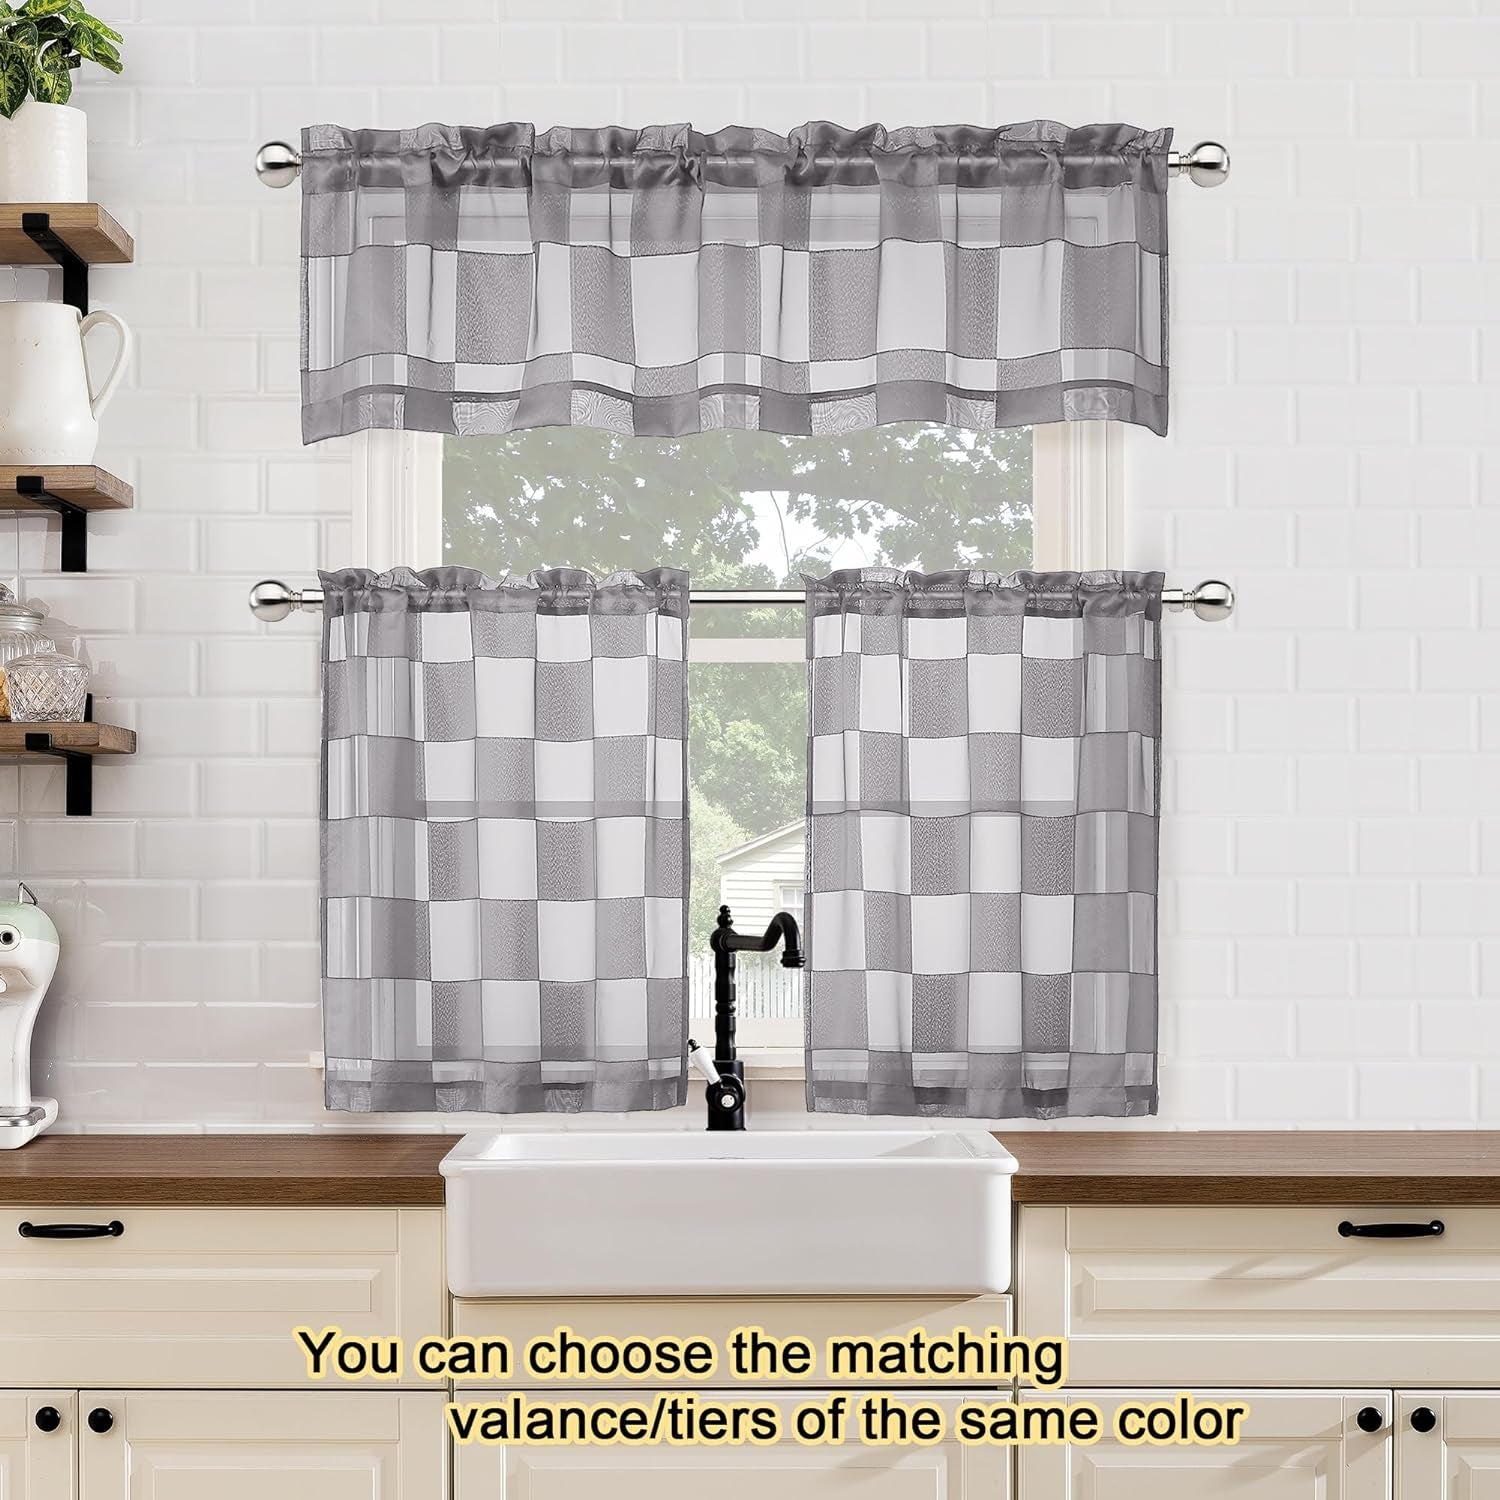 OVZME Barry Charcoal Grey Sheer Curtain Valance for Windows - Clip Checkered Textured Semi Sheer Valance for Basement Bathroom Kitchen, Dual Rod Pocket, 56Wx14L, 1 Panel